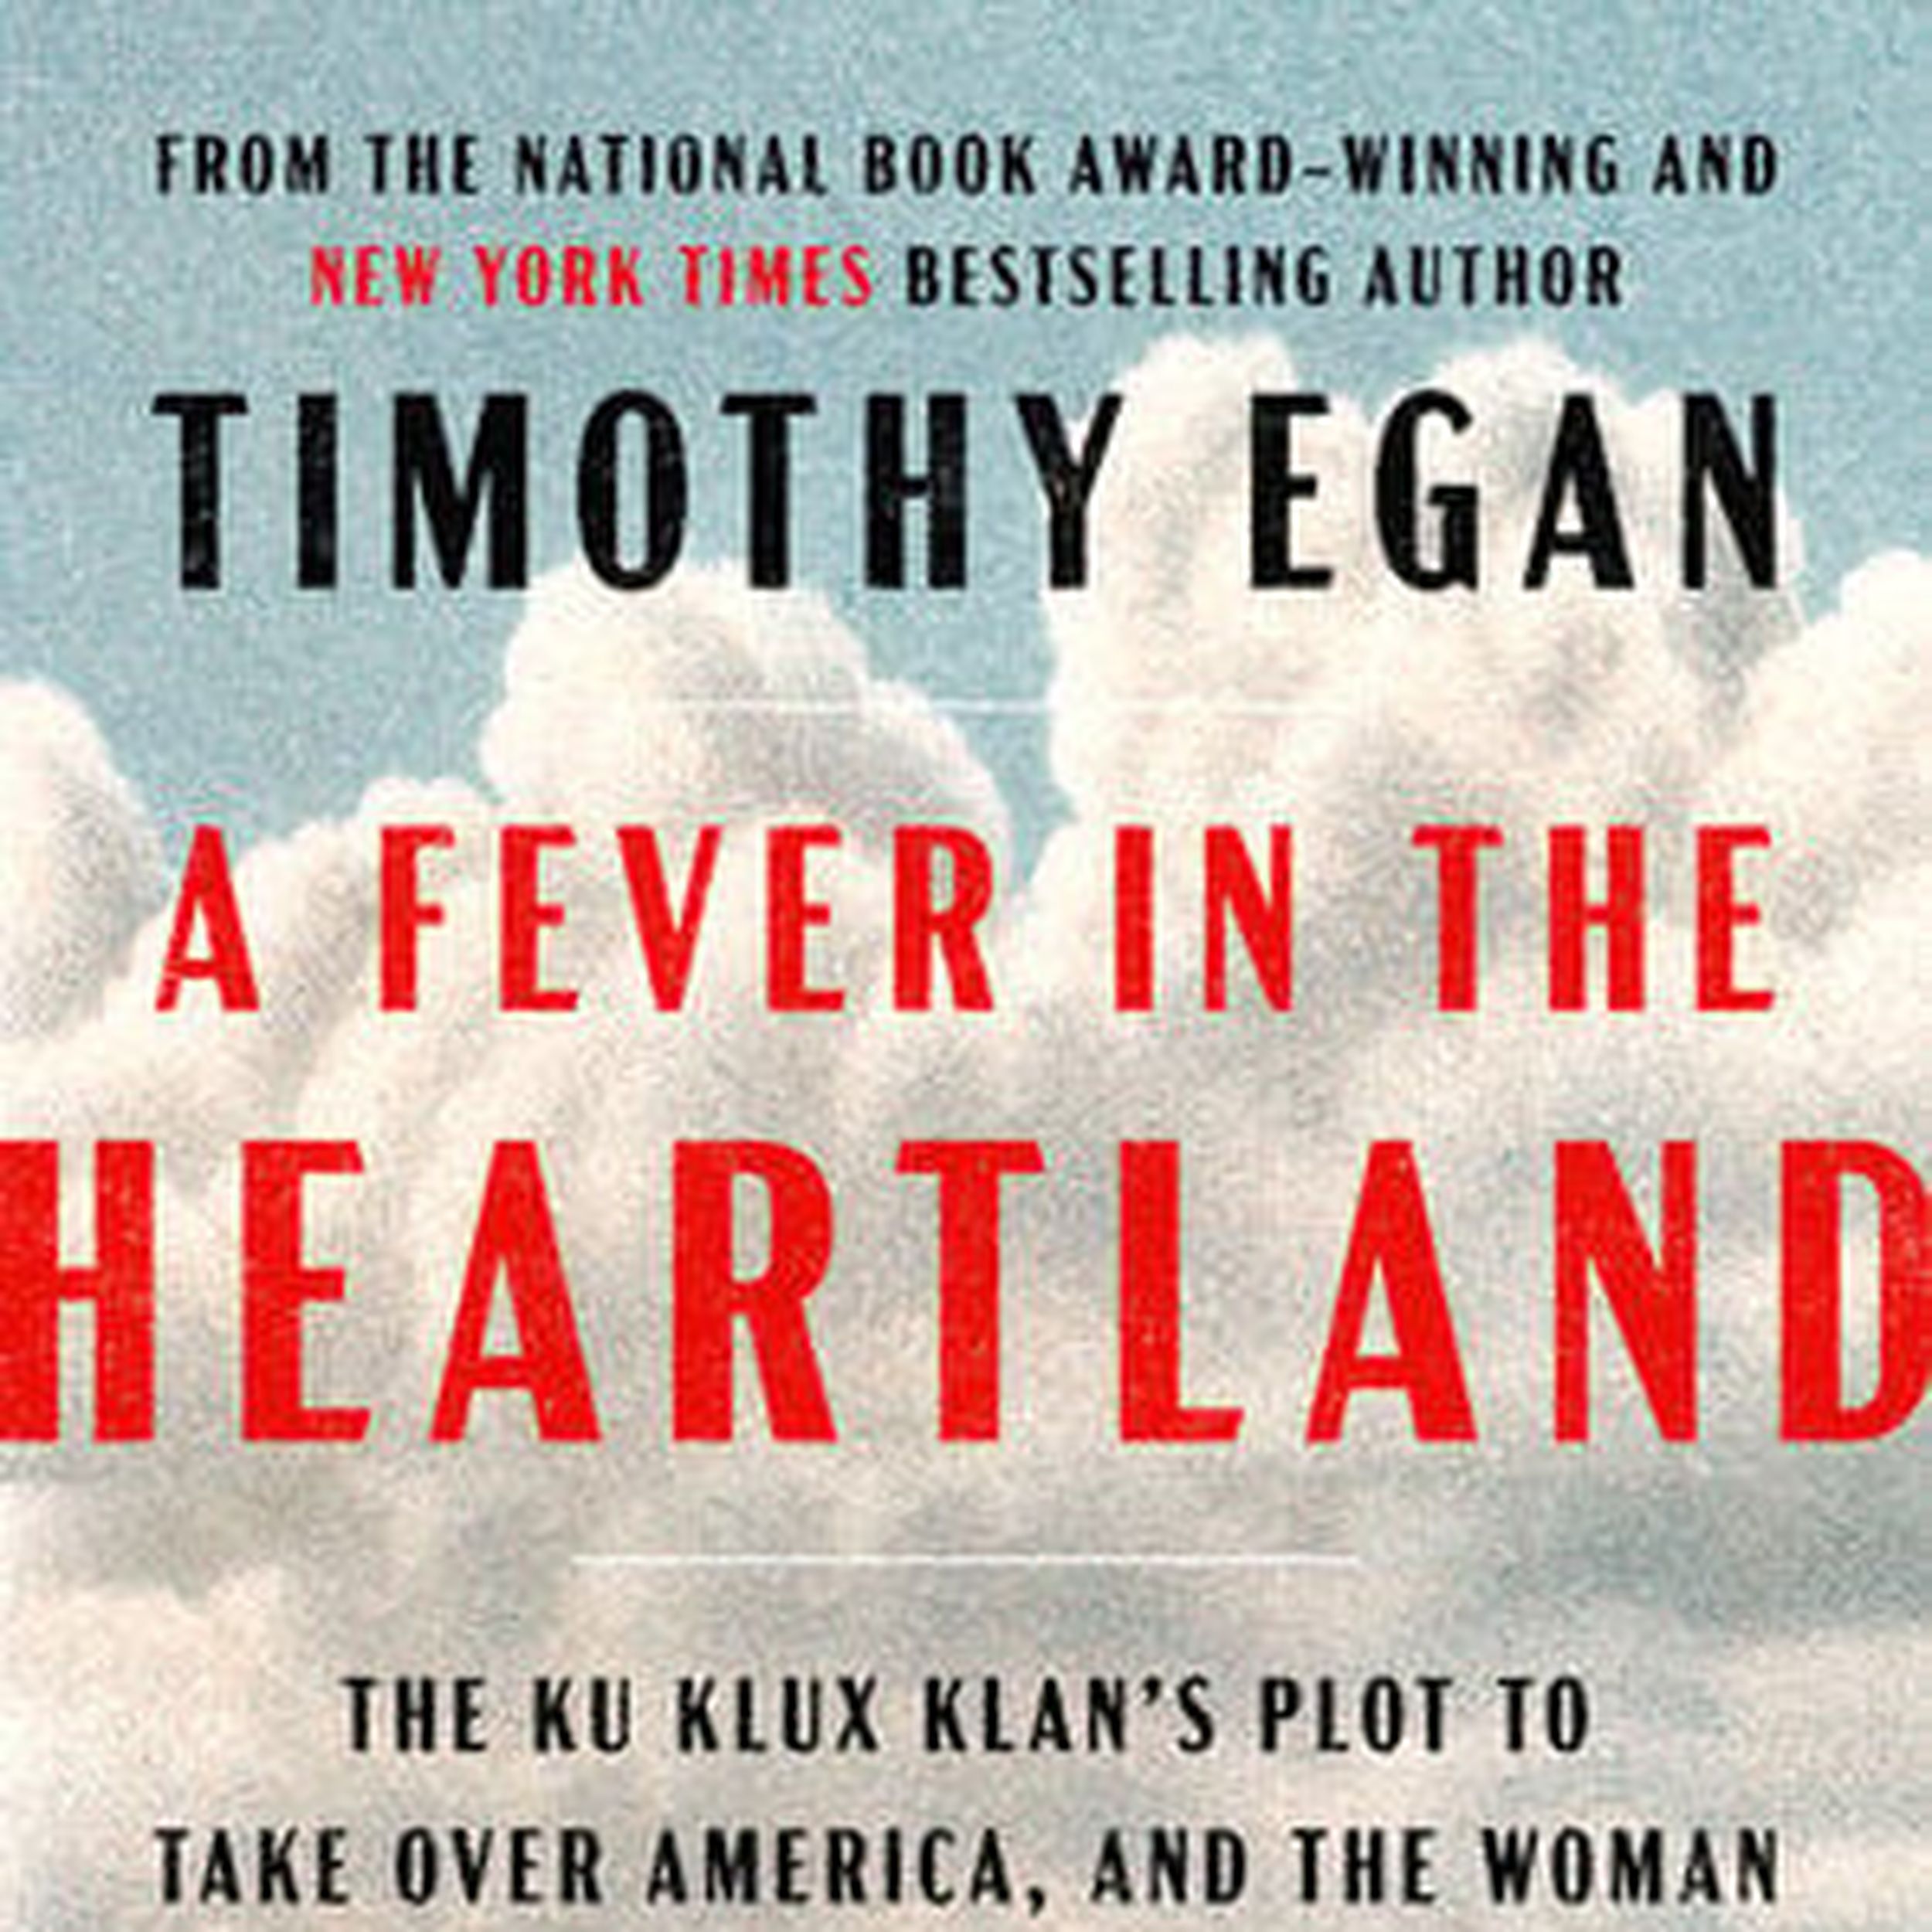 In his brilliant new book, Timothy Egan searches for faith in a